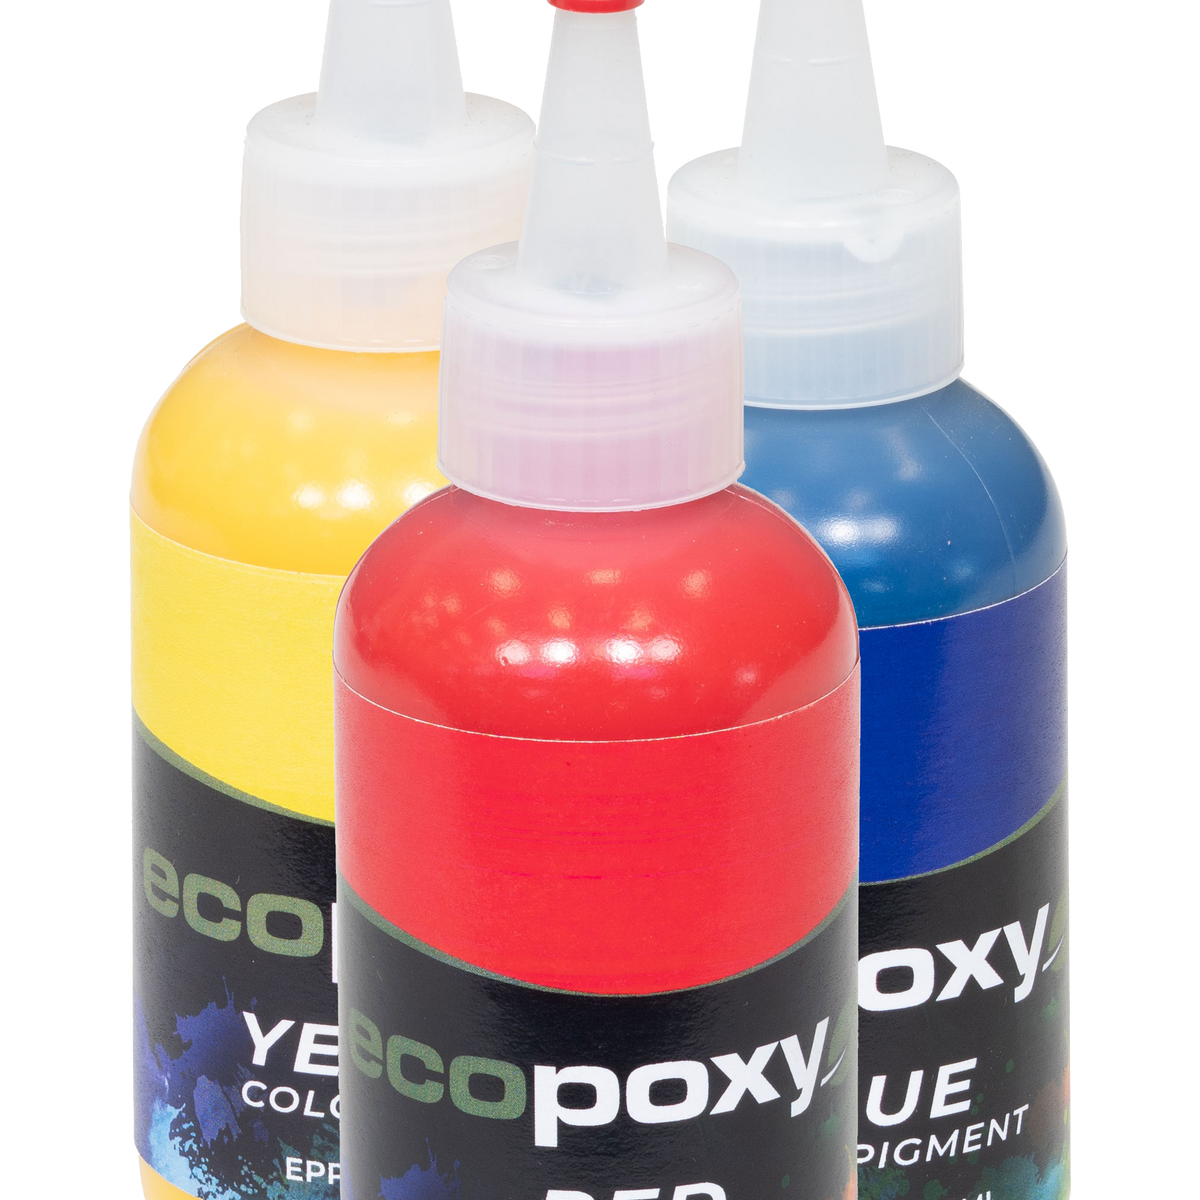 Black Opaque Liquid Pigment by The Epoxy Resin Store